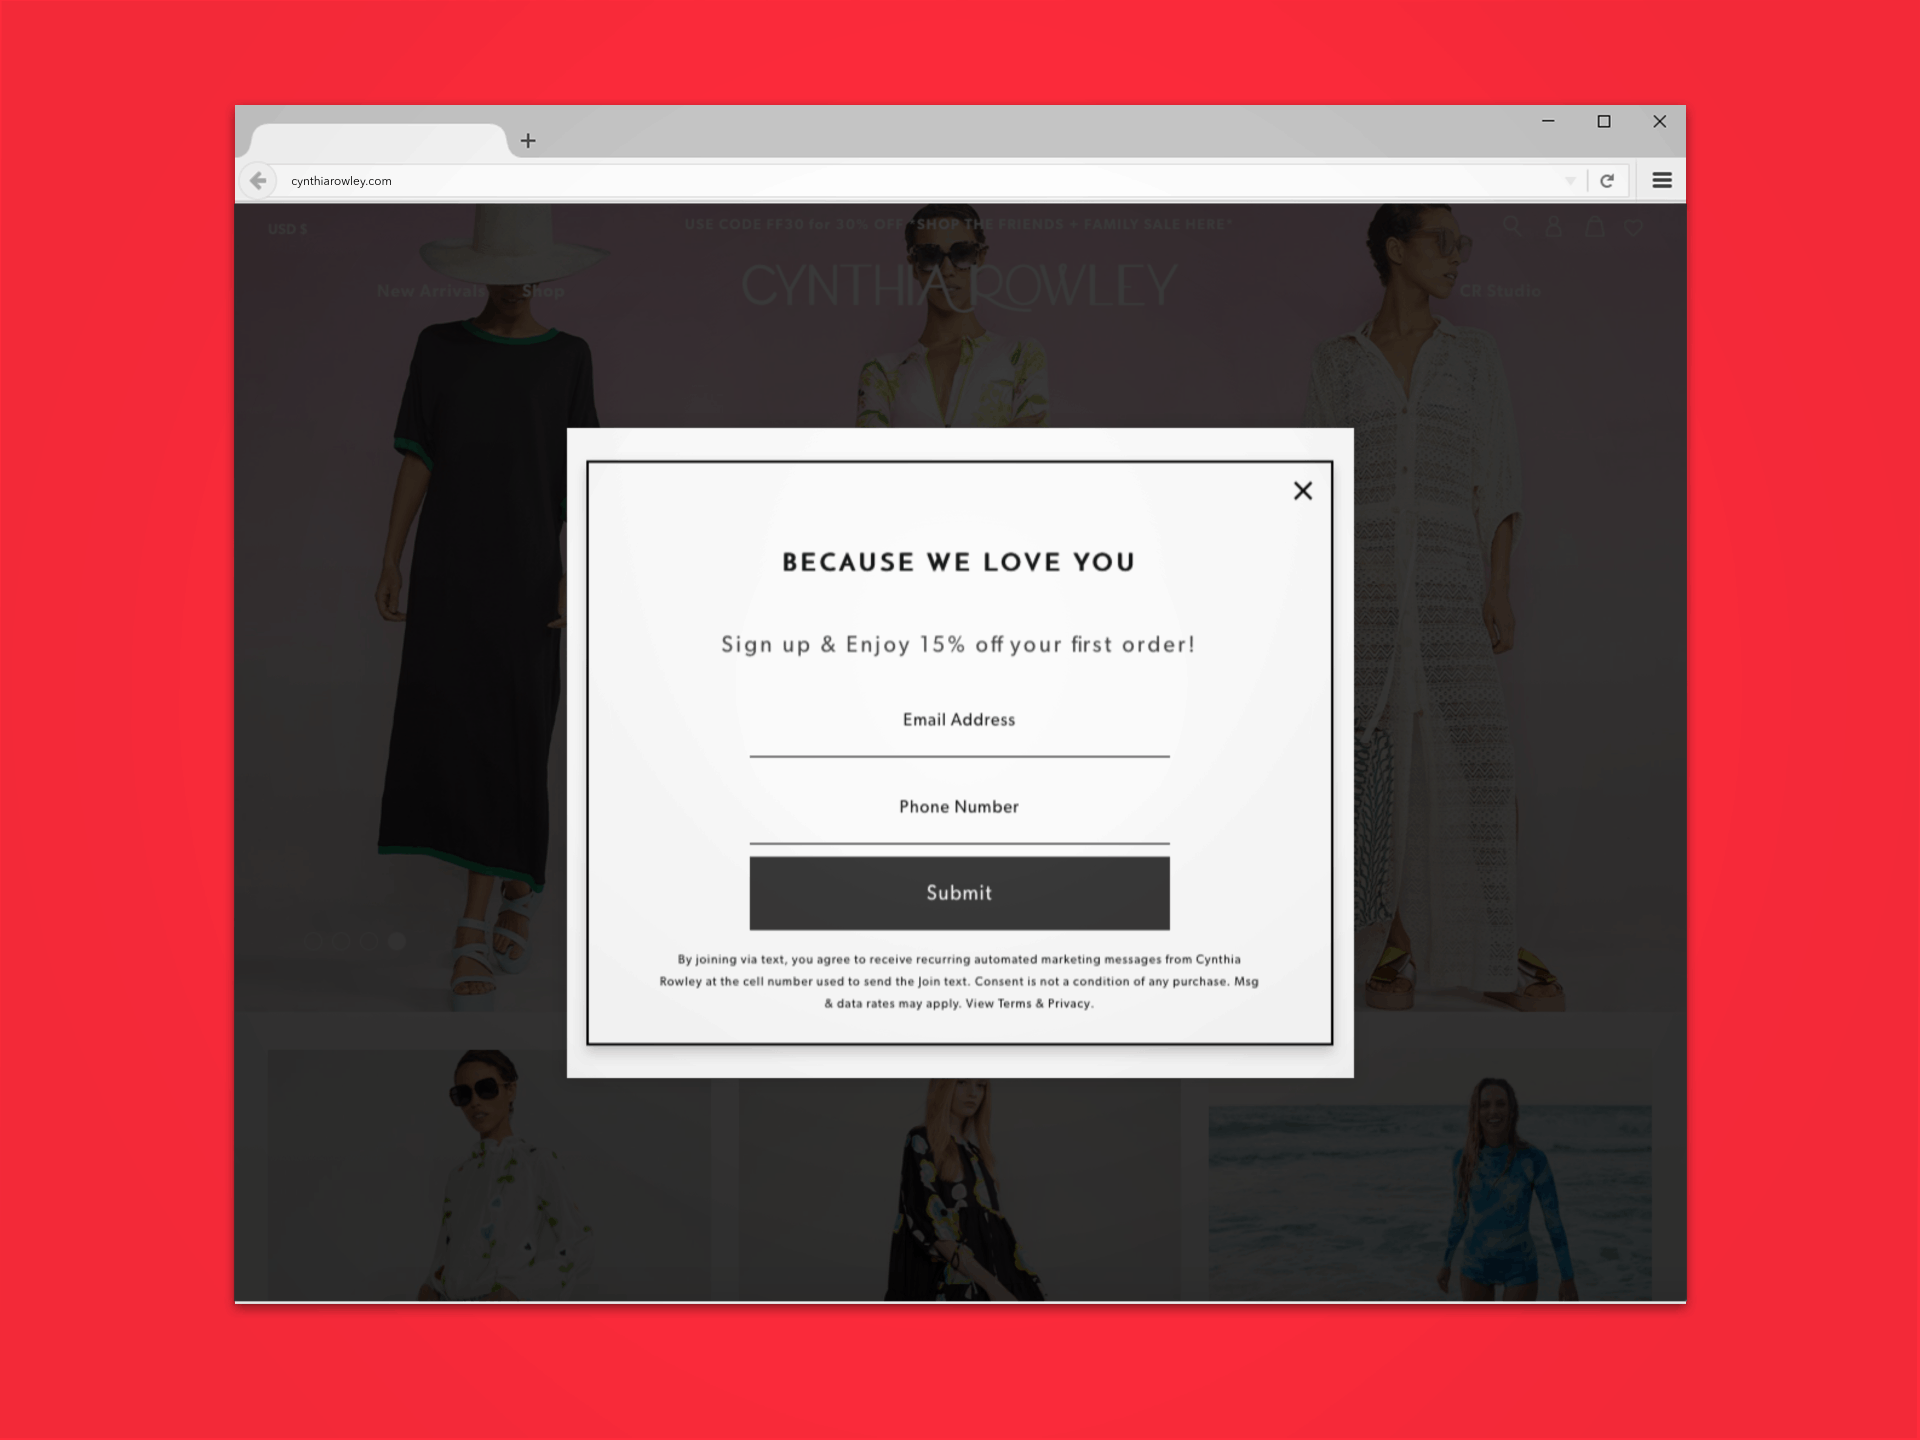 sms marketing pop-up example from cynthia rowley